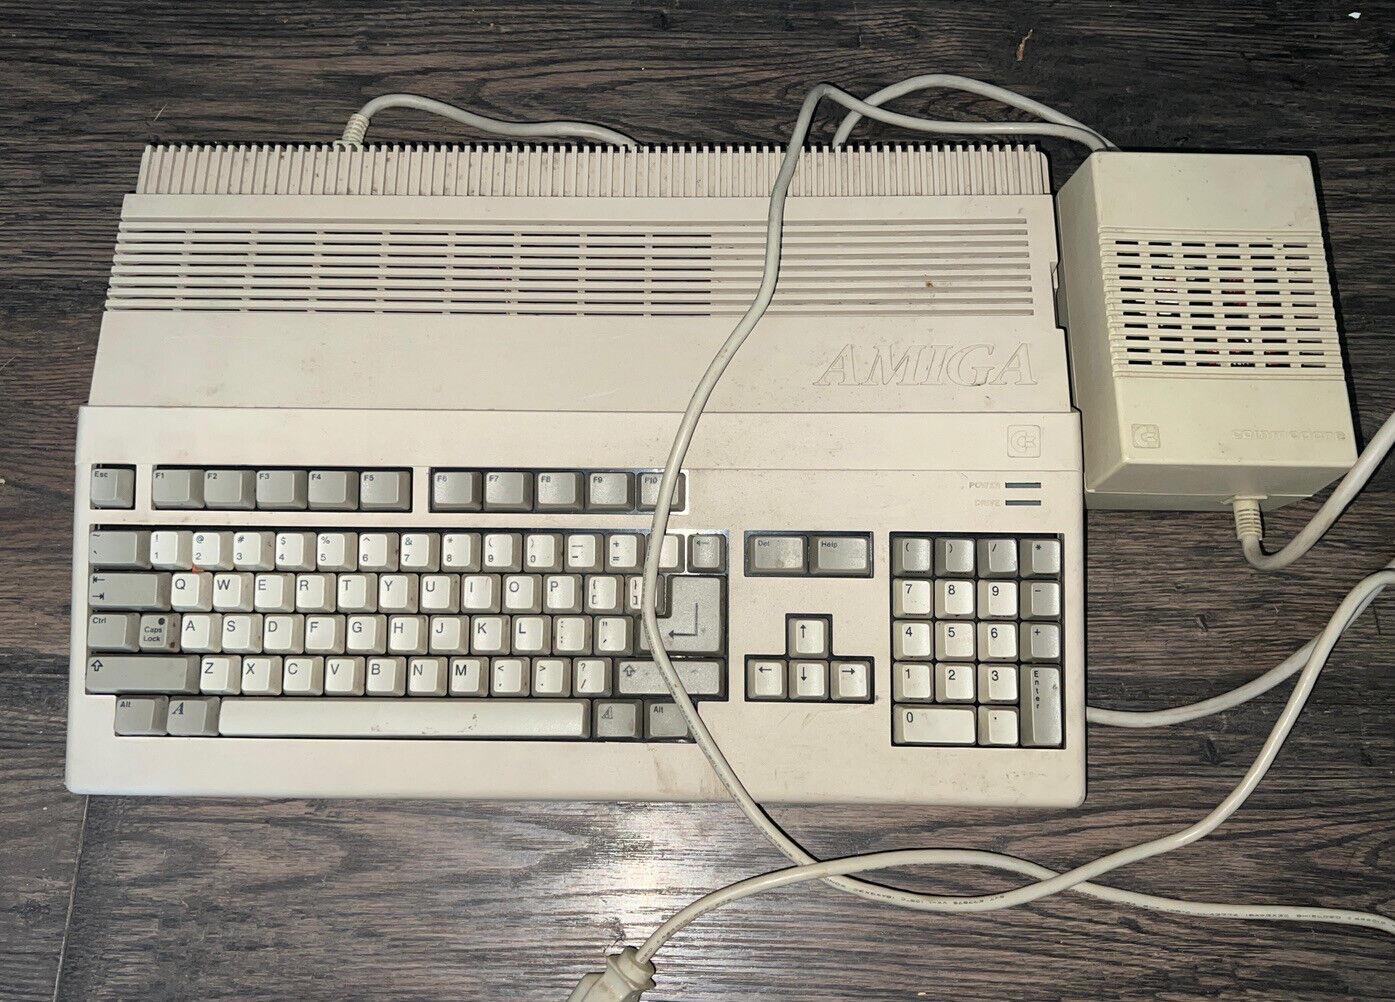 Commodore Amiga A500 Computer Tested to Disk Load Screen